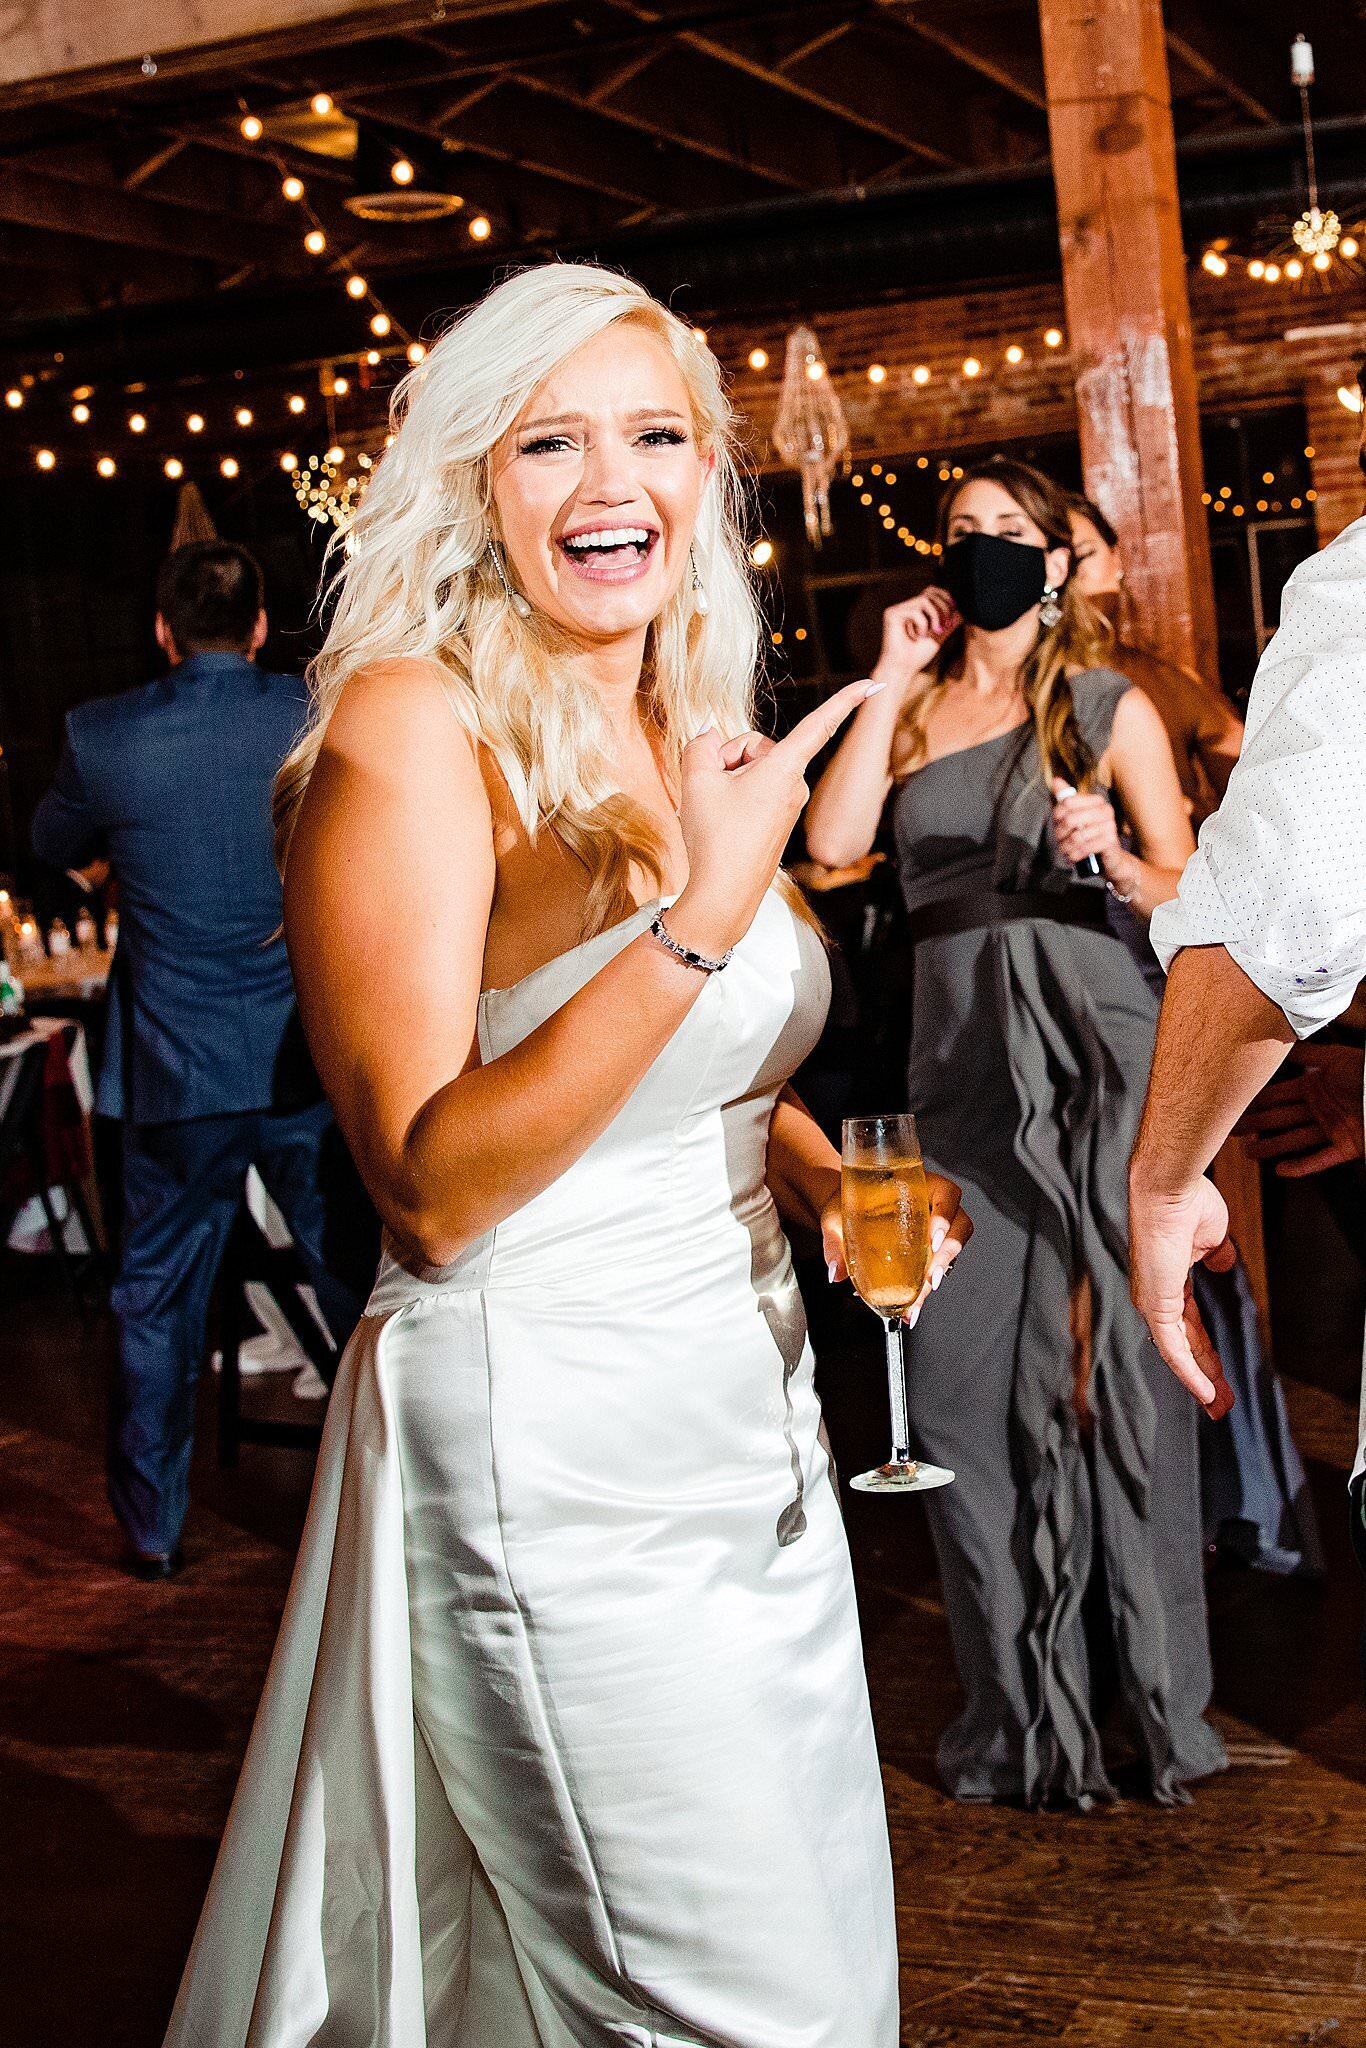 Bride laughing candidly on the dance floor holding a glass of wine